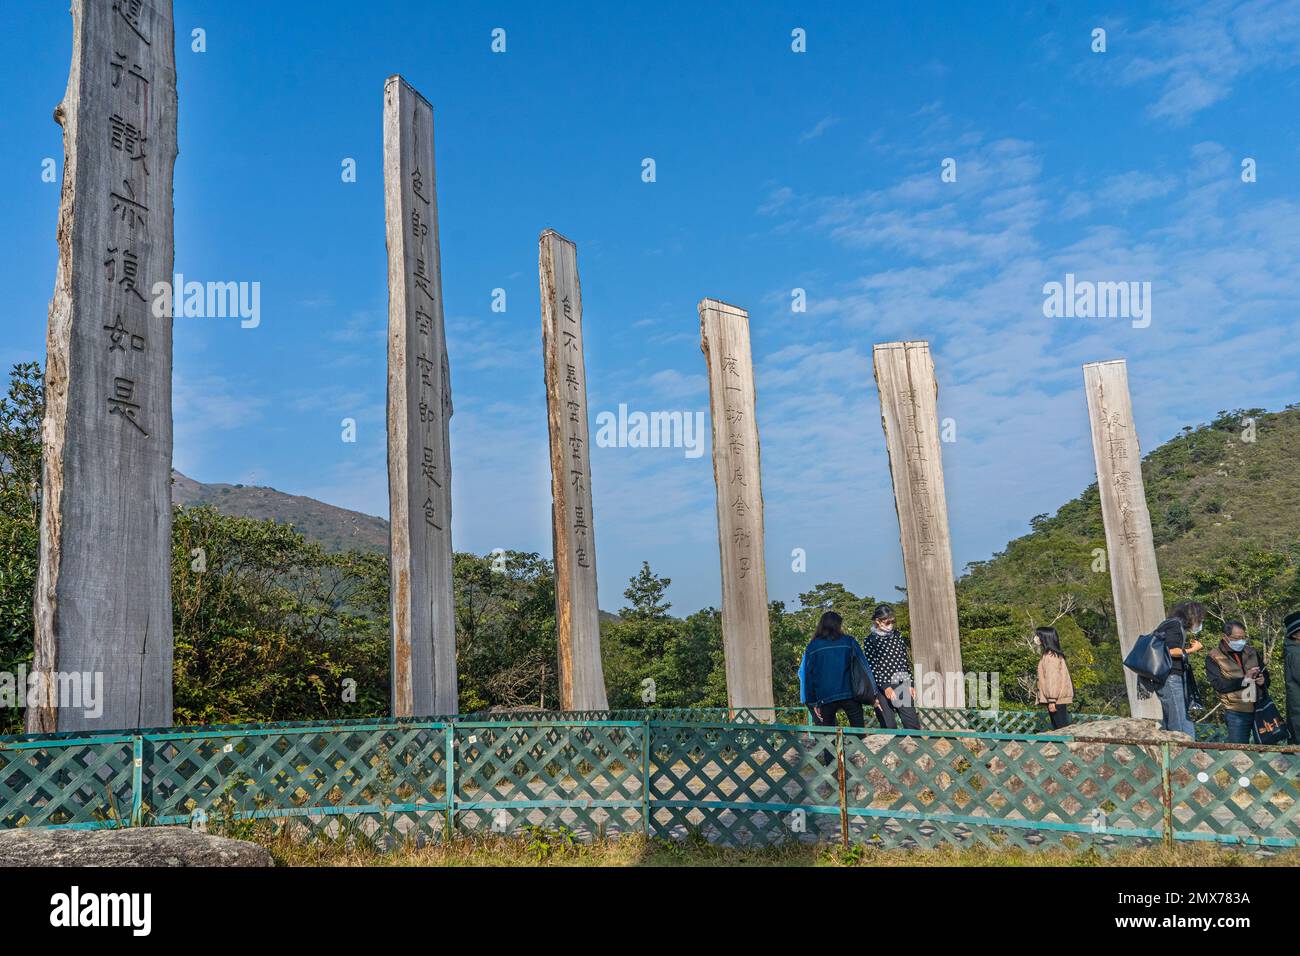 Hong Kong, Lantau Island - The Wisdom Path is a monument  of 38 wooden columns on which verses from the centuries-old Heart Sutra have been carved Stock Photo